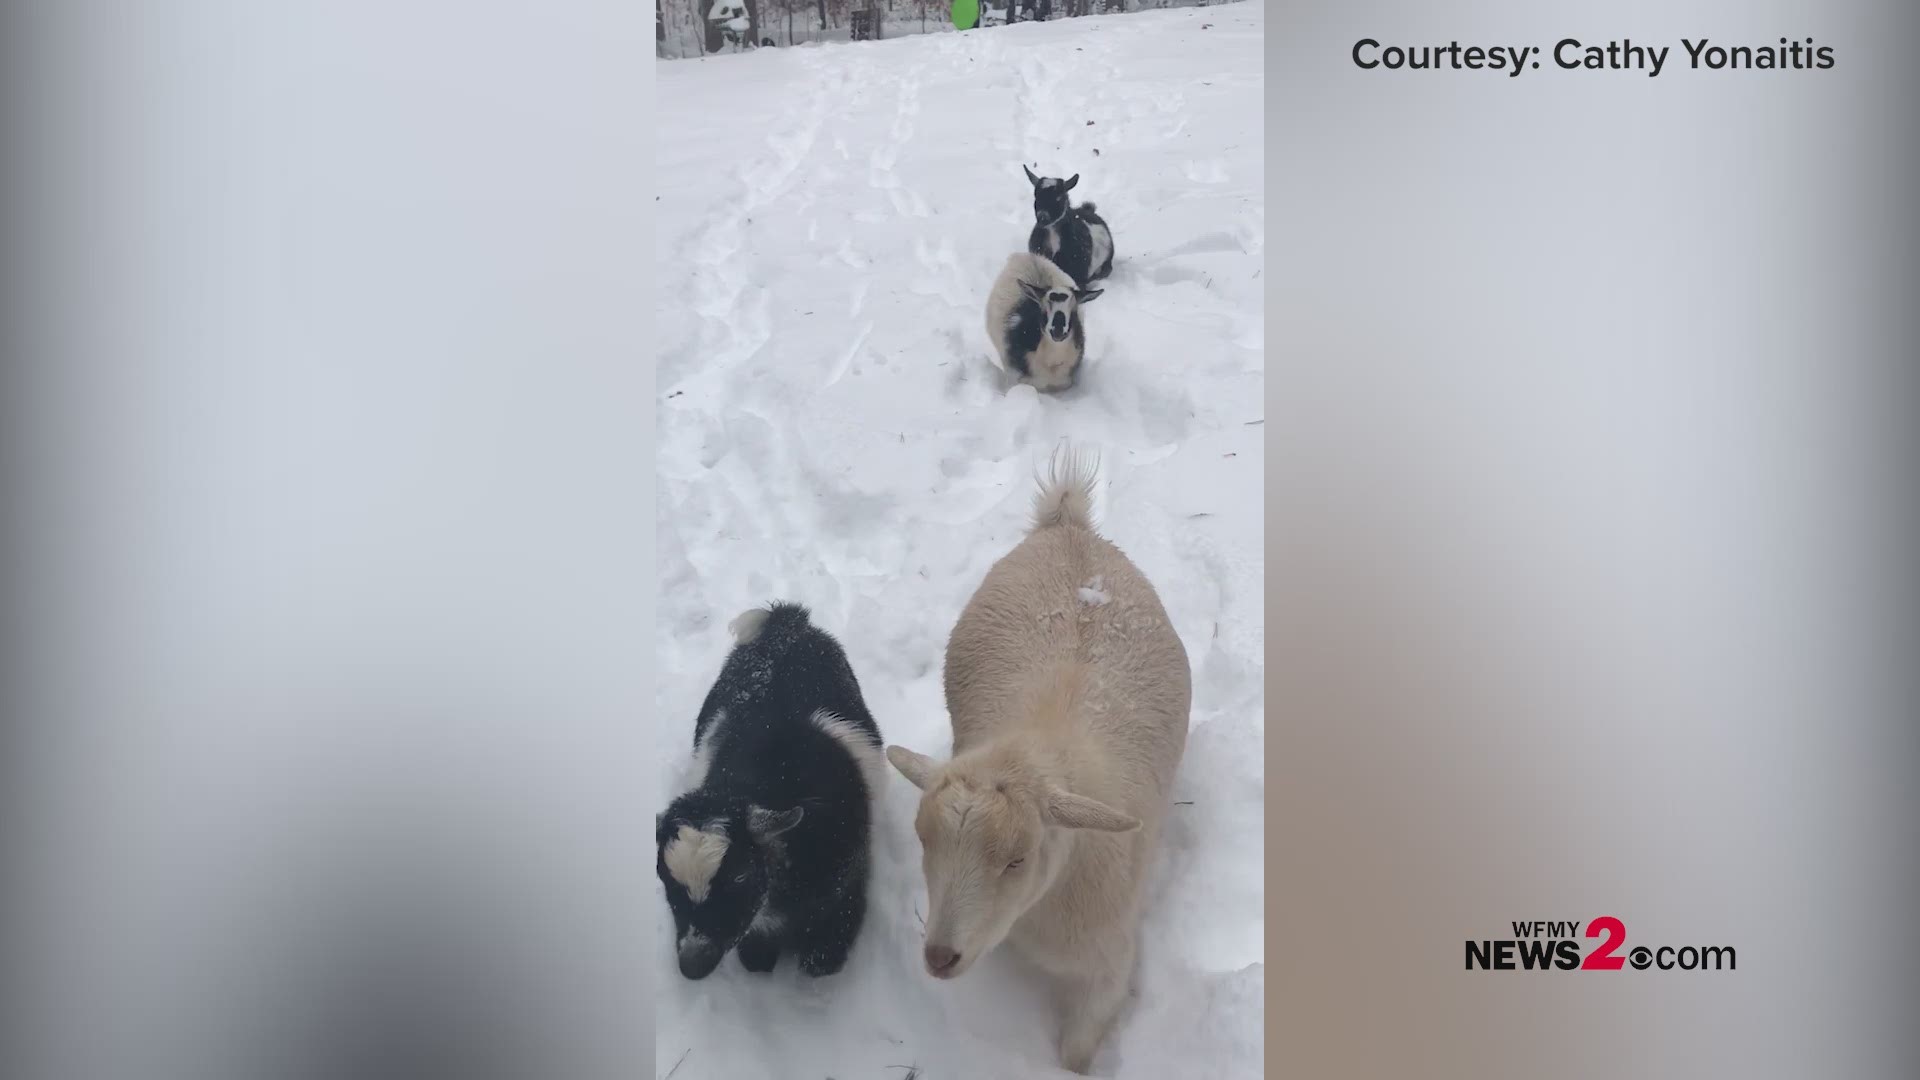 Goats jumping through the snow in Greensboro.